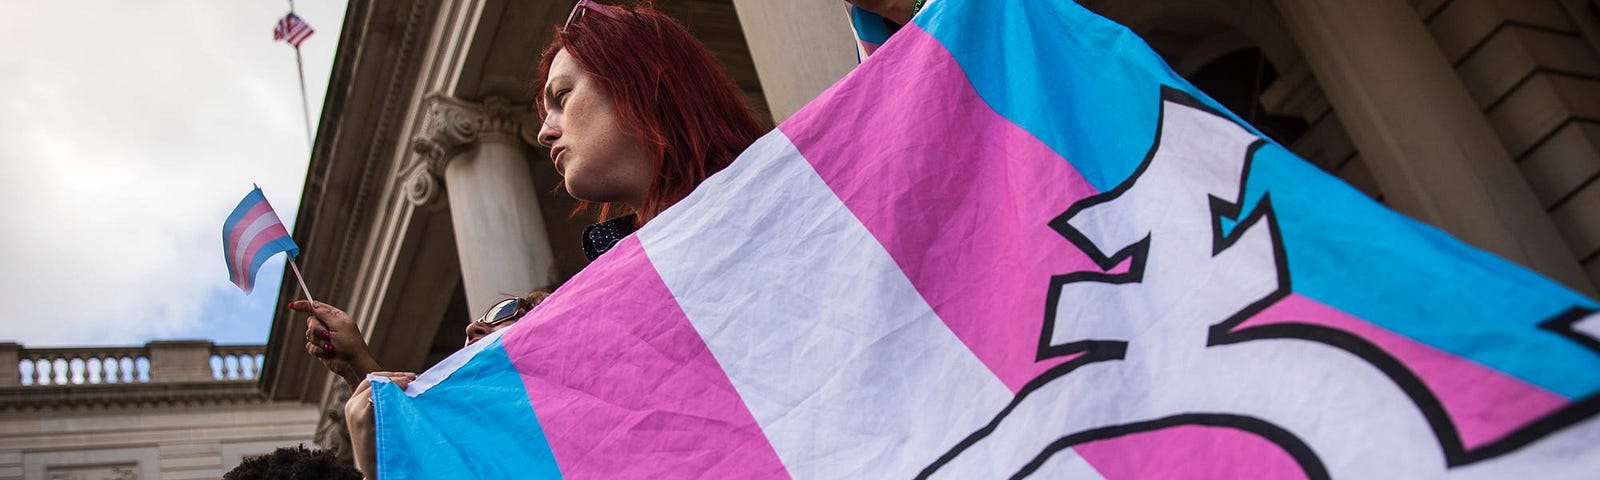 Rally held in support of transgender community in NYC.